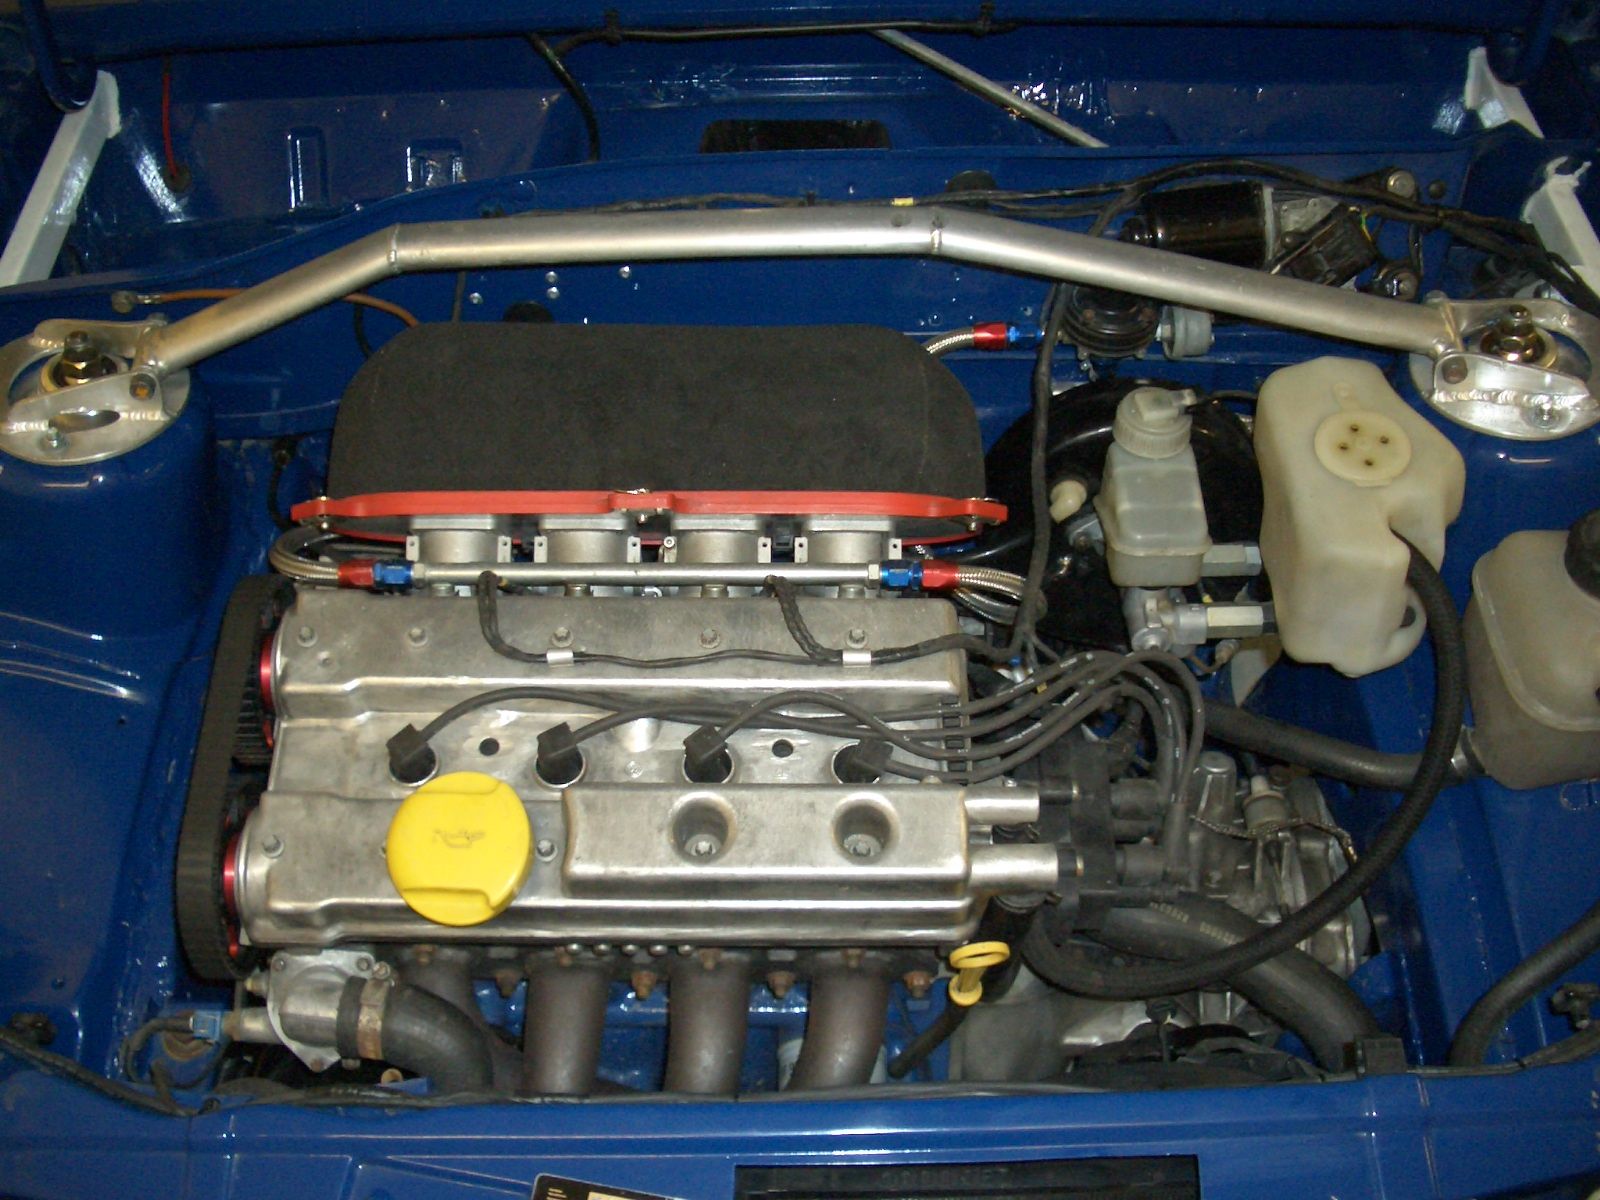 Vauxhall Parts for Sale - Racing Parts for Sale